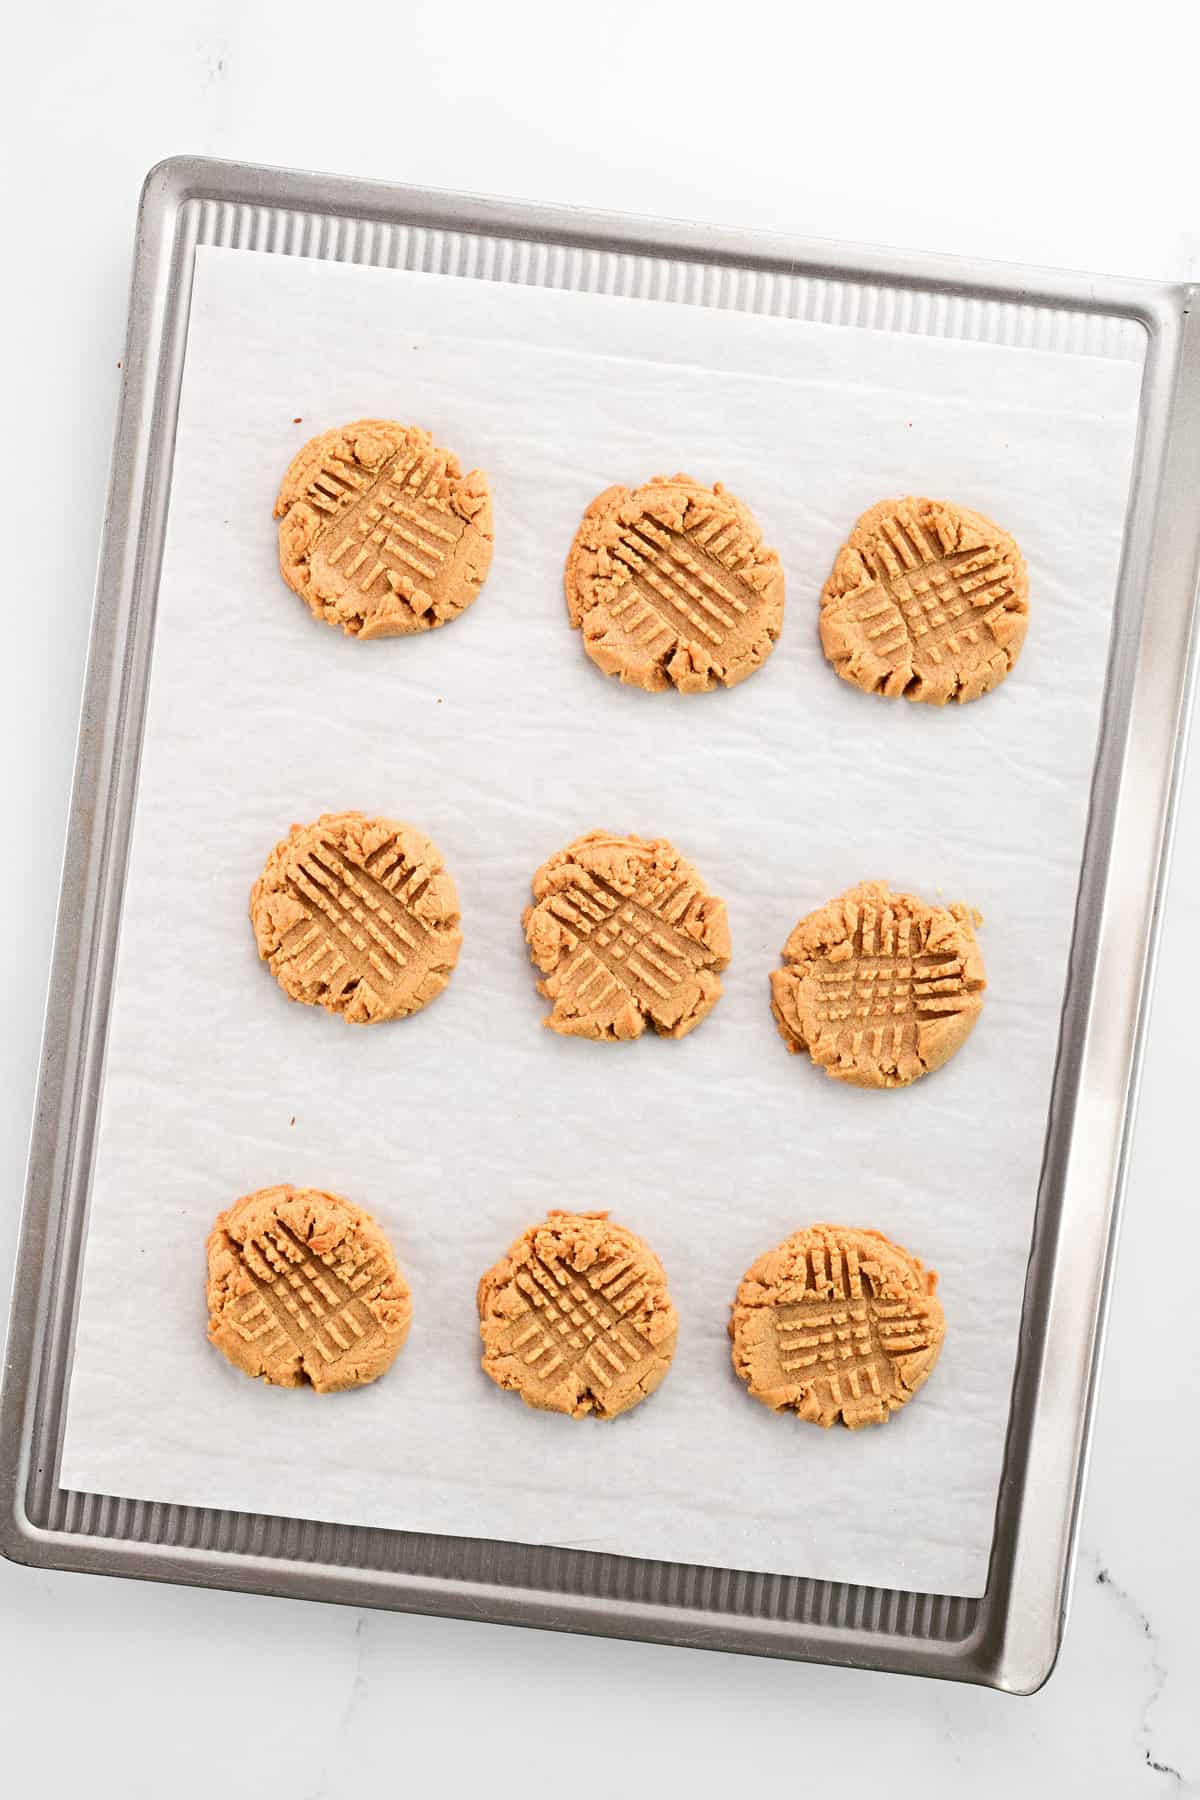 Four-ingredient peanut butter cookies on a baking sheet.